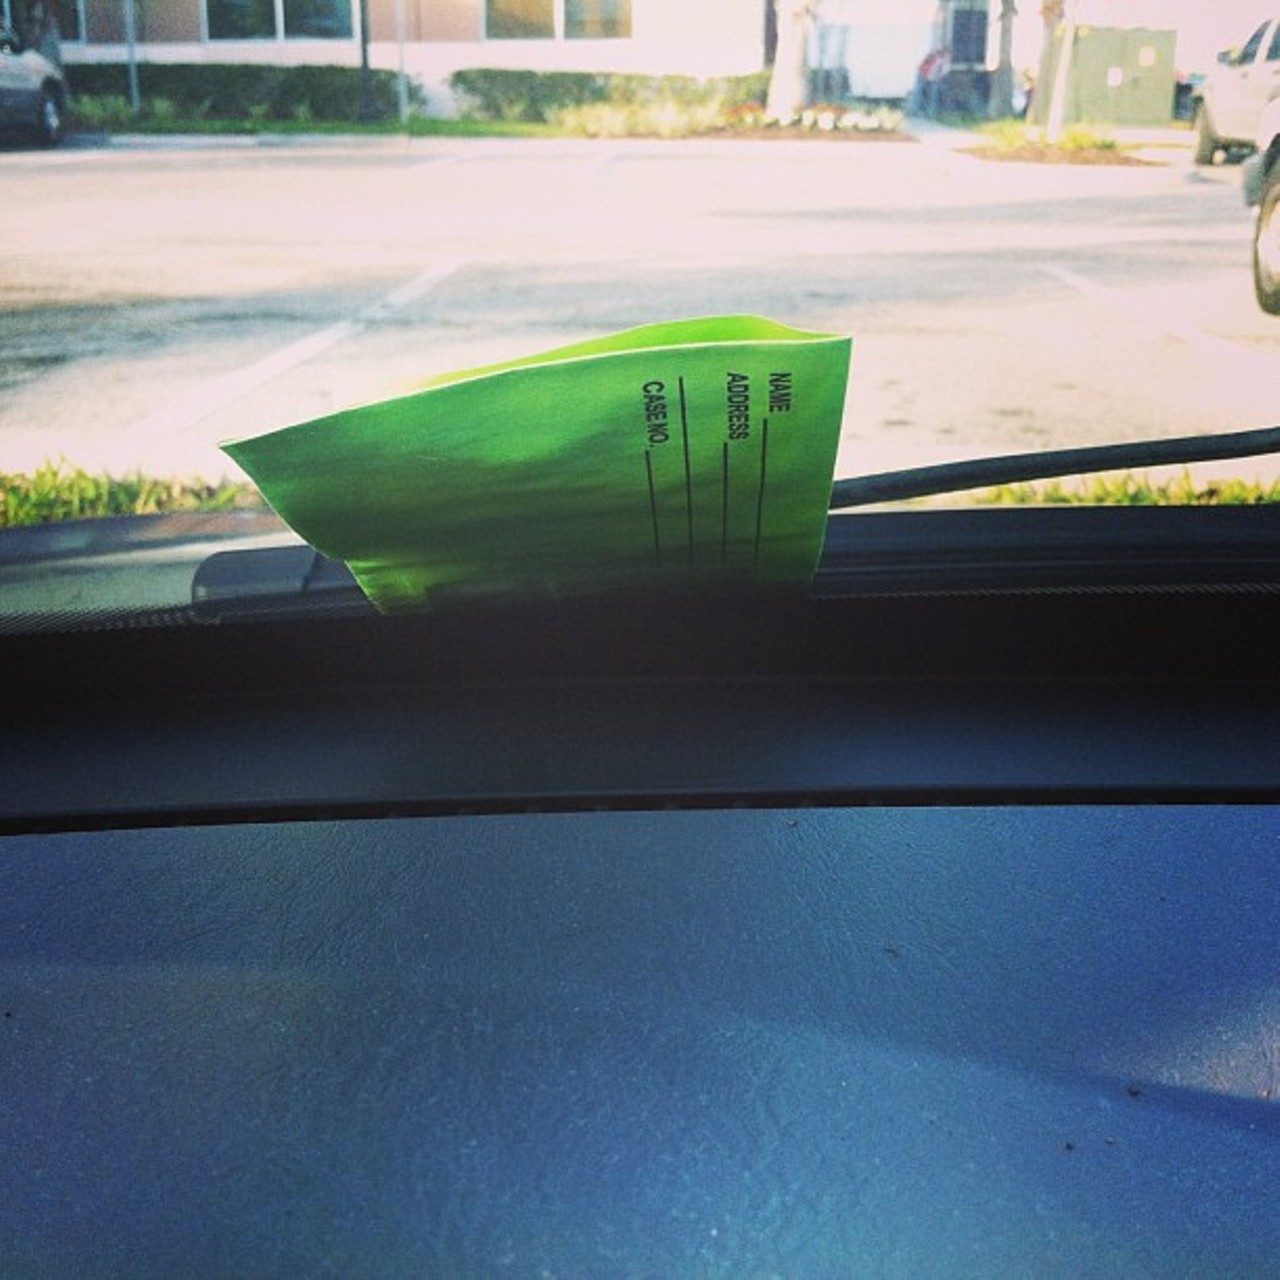 It has gotten to the point that finding a parking ticket on your windshield is like seeing an old friend.
"That moment when you get in the car and see this green little piece of crap on ur windshield."
Photo via sing_sational